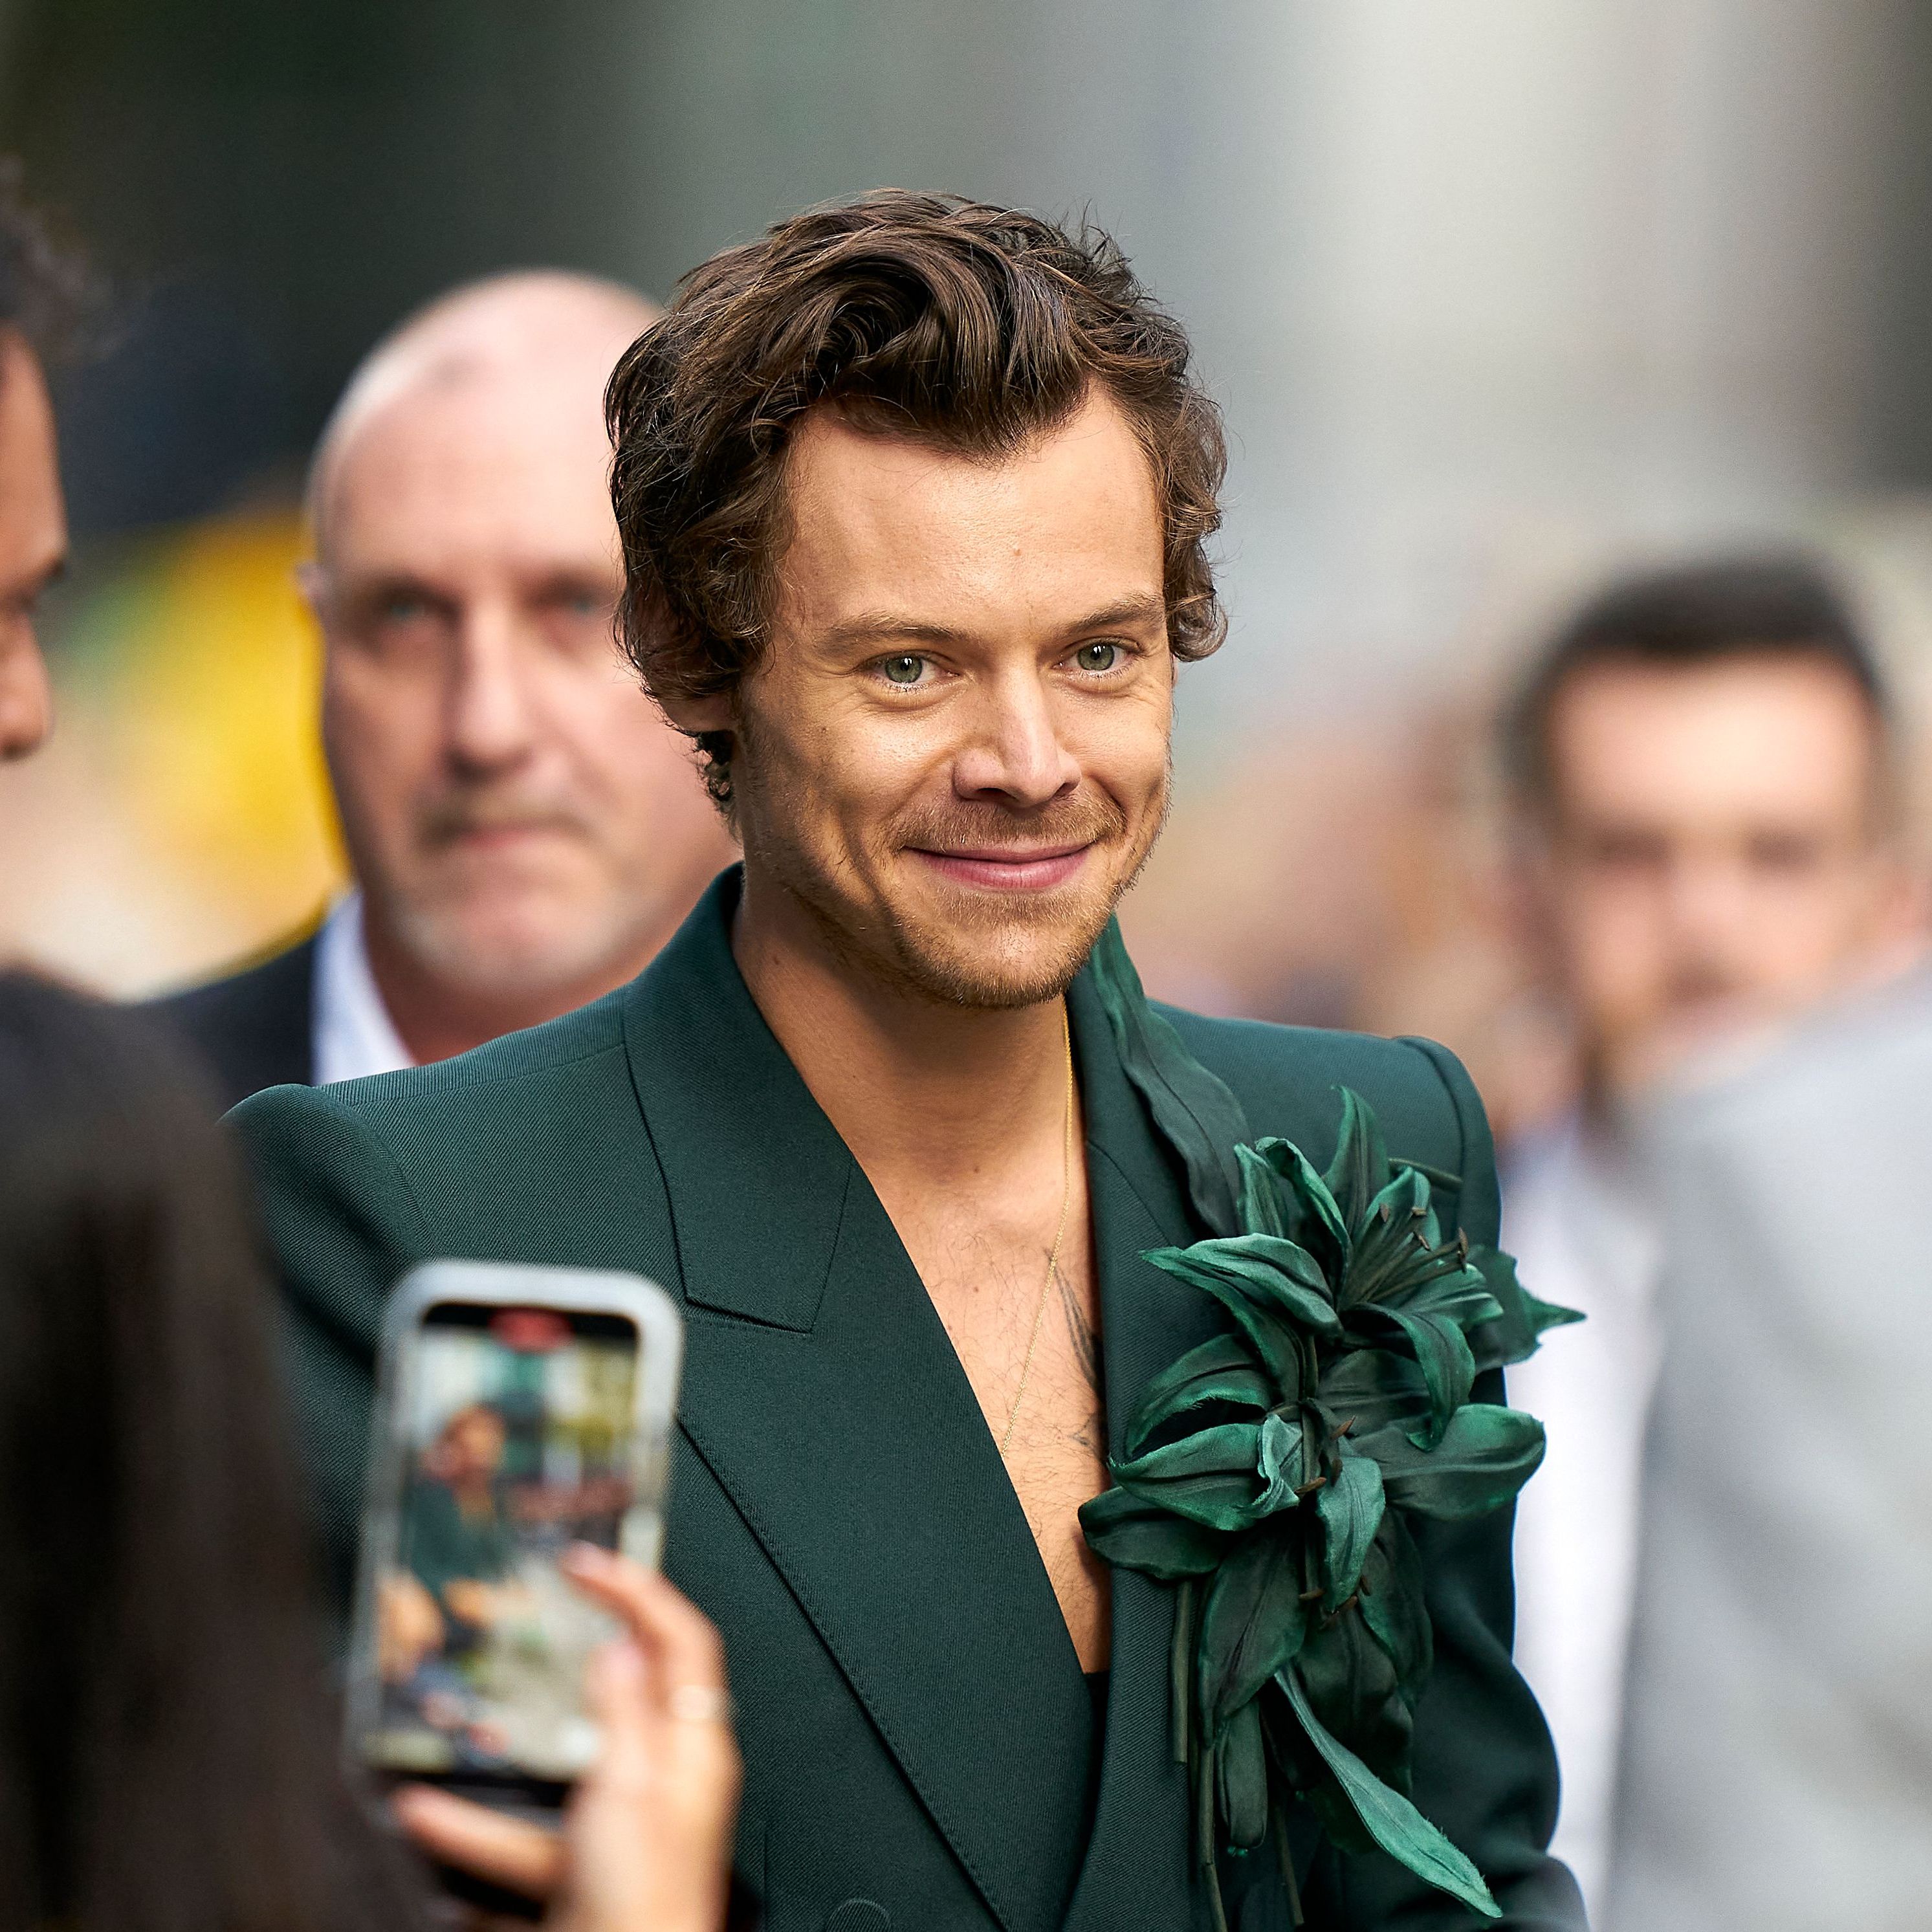 Harry Styles' Brand Just Launched Makeup Products